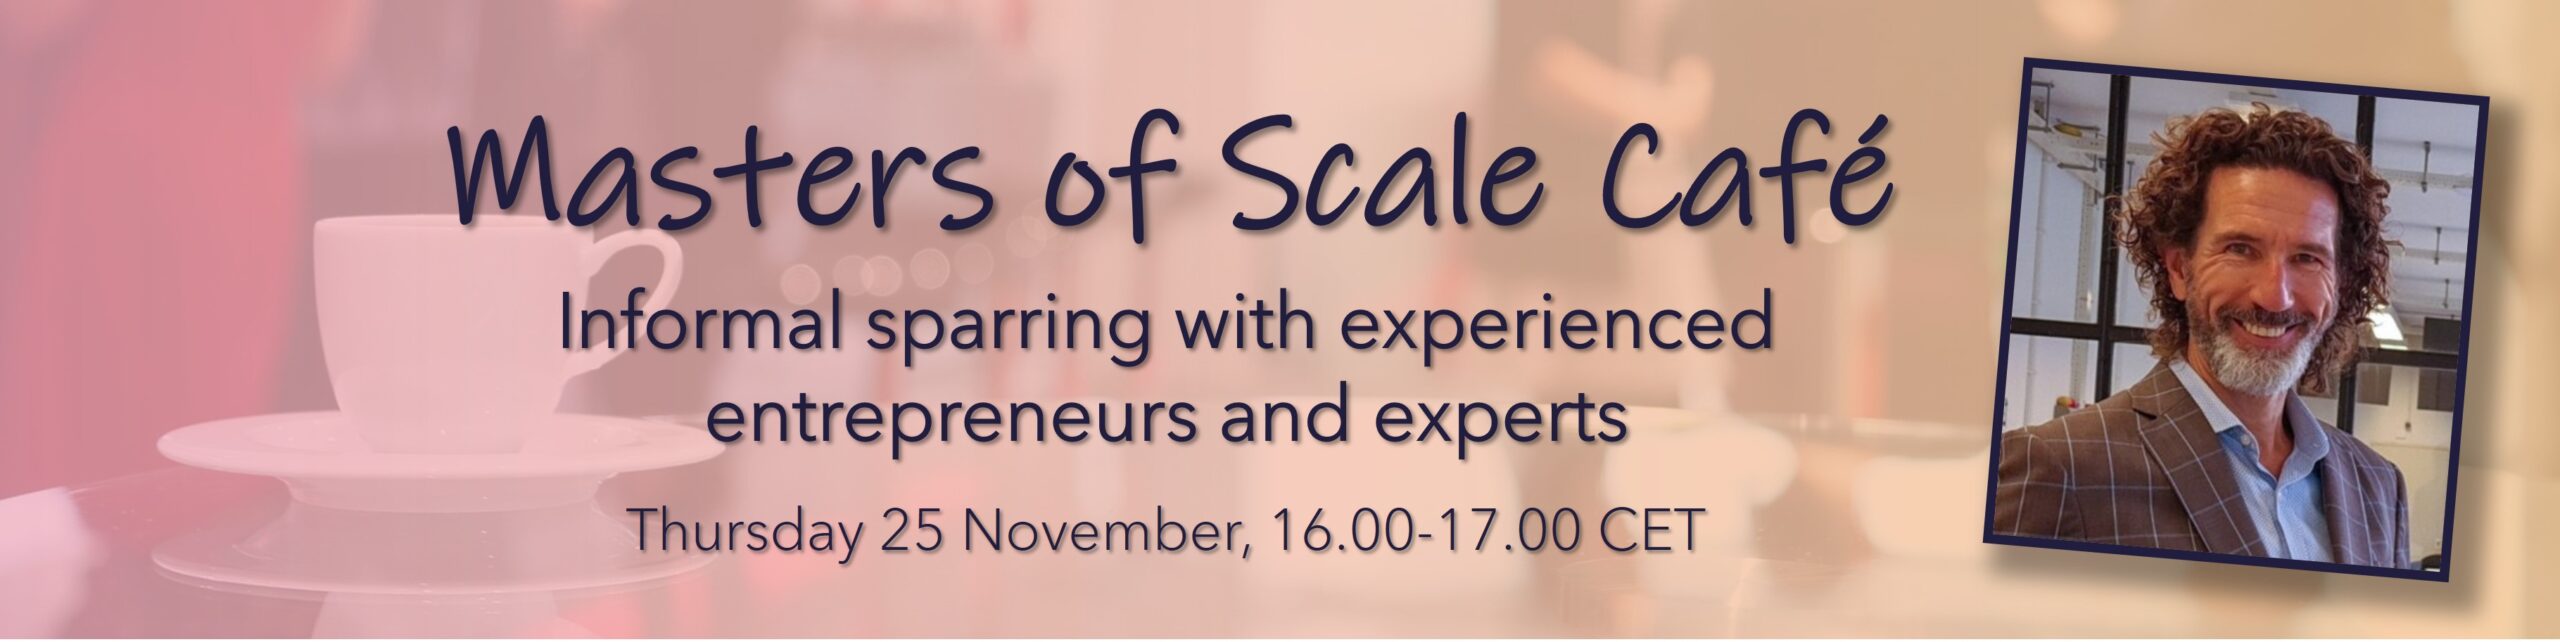 Masters of Scale Café with Herbert ten Have, CEO Fizyr